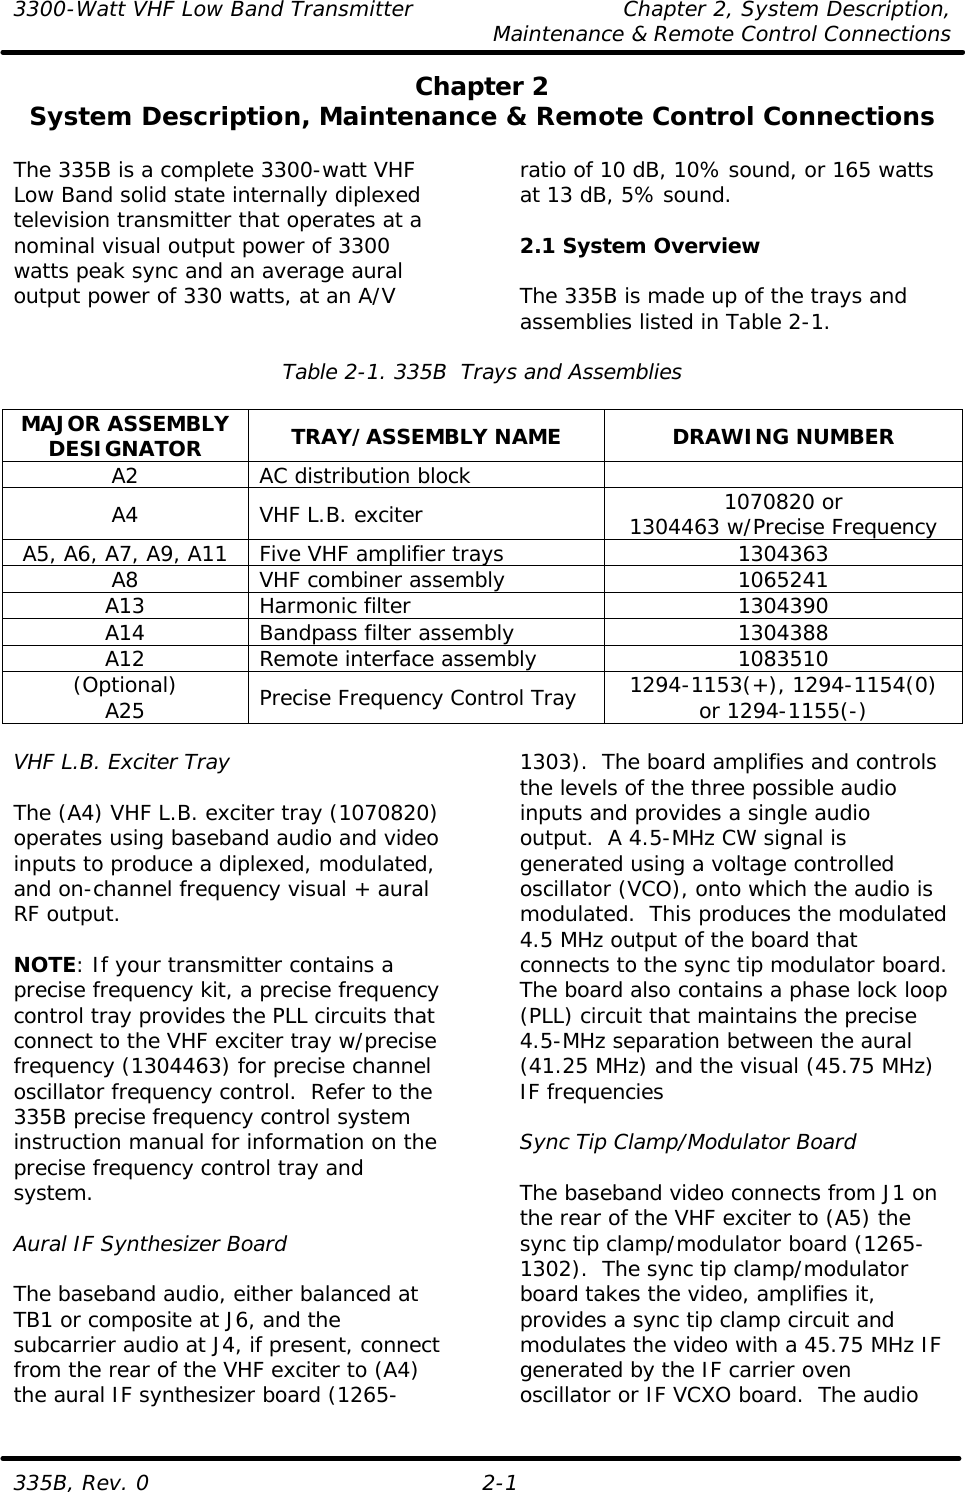 3300-Watt VHF Low Band Transmitter    Chapter 2, System Description,     Maintenance &amp; Remote Control Connections 335B, Rev. 0 2-1 Chapter 2 System Description, Maintenance &amp; Remote Control Connections  The 335B is a complete 3300-watt VHF Low Band solid state internally diplexed television transmitter that operates at a nominal visual output power of 3300 watts peak sync and an average aural output power of 330 watts, at an A/V ratio of 10 dB, 10% sound, or 165 watts at 13 dB, 5% sound.  2.1 System Overview  The 335B is made up of the trays and assemblies listed in Table 2-1.  Table 2-1. 335B  Trays and Assemblies  MAJOR ASSEMBLY DESIGNATOR TRAY/ASSEMBLY NAME DRAWING NUMBER A2 AC distribution block   A4 VHF L.B. exciter 1070820 or 1304463 w/Precise Frequency A5, A6, A7, A9, A11 Five VHF amplifier trays 1304363 A8 VHF combiner assembly 1065241 A13 Harmonic filter 1304390 A14 Bandpass filter assembly 1304388 A12 Remote interface assembly 1083510 (Optional) A25 Precise Frequency Control Tray 1294-1153(+), 1294-1154(0) or 1294-1155(-)  VHF L.B. Exciter Tray  The (A4) VHF L.B. exciter tray (1070820) operates using baseband audio and video inputs to produce a diplexed, modulated, and on-channel frequency visual + aural RF output.  NOTE: If your transmitter contains a precise frequency kit, a precise frequency control tray provides the PLL circuits that connect to the VHF exciter tray w/precise frequency (1304463) for precise channel oscillator frequency control.  Refer to the 335B precise frequency control system instruction manual for information on the precise frequency control tray and system.  Aural IF Synthesizer Board  The baseband audio, either balanced at TB1 or composite at J6, and the subcarrier audio at J4, if present, connect from the rear of the VHF exciter to (A4) the aural IF synthesizer board (1265-1303).  The board amplifies and controls the levels of the three possible audio inputs and provides a single audio output.  A 4.5-MHz CW signal is generated using a voltage controlled oscillator (VCO), onto which the audio is modulated.  This produces the modulated 4.5 MHz output of the board that connects to the sync tip modulator board.  The board also contains a phase lock loop (PLL) circuit that maintains the precise 4.5-MHz separation between the aural (41.25 MHz) and the visual (45.75 MHz) IF frequencies  Sync Tip Clamp/Modulator Board  The baseband video connects from J1 on the rear of the VHF exciter to (A5) the sync tip clamp/modulator board (1265-1302).  The sync tip clamp/modulator board takes the video, amplifies it, provides a sync tip clamp circuit and modulates the video with a 45.75 MHz IF generated by the IF carrier oven oscillator or IF VCXO board.  The audio 